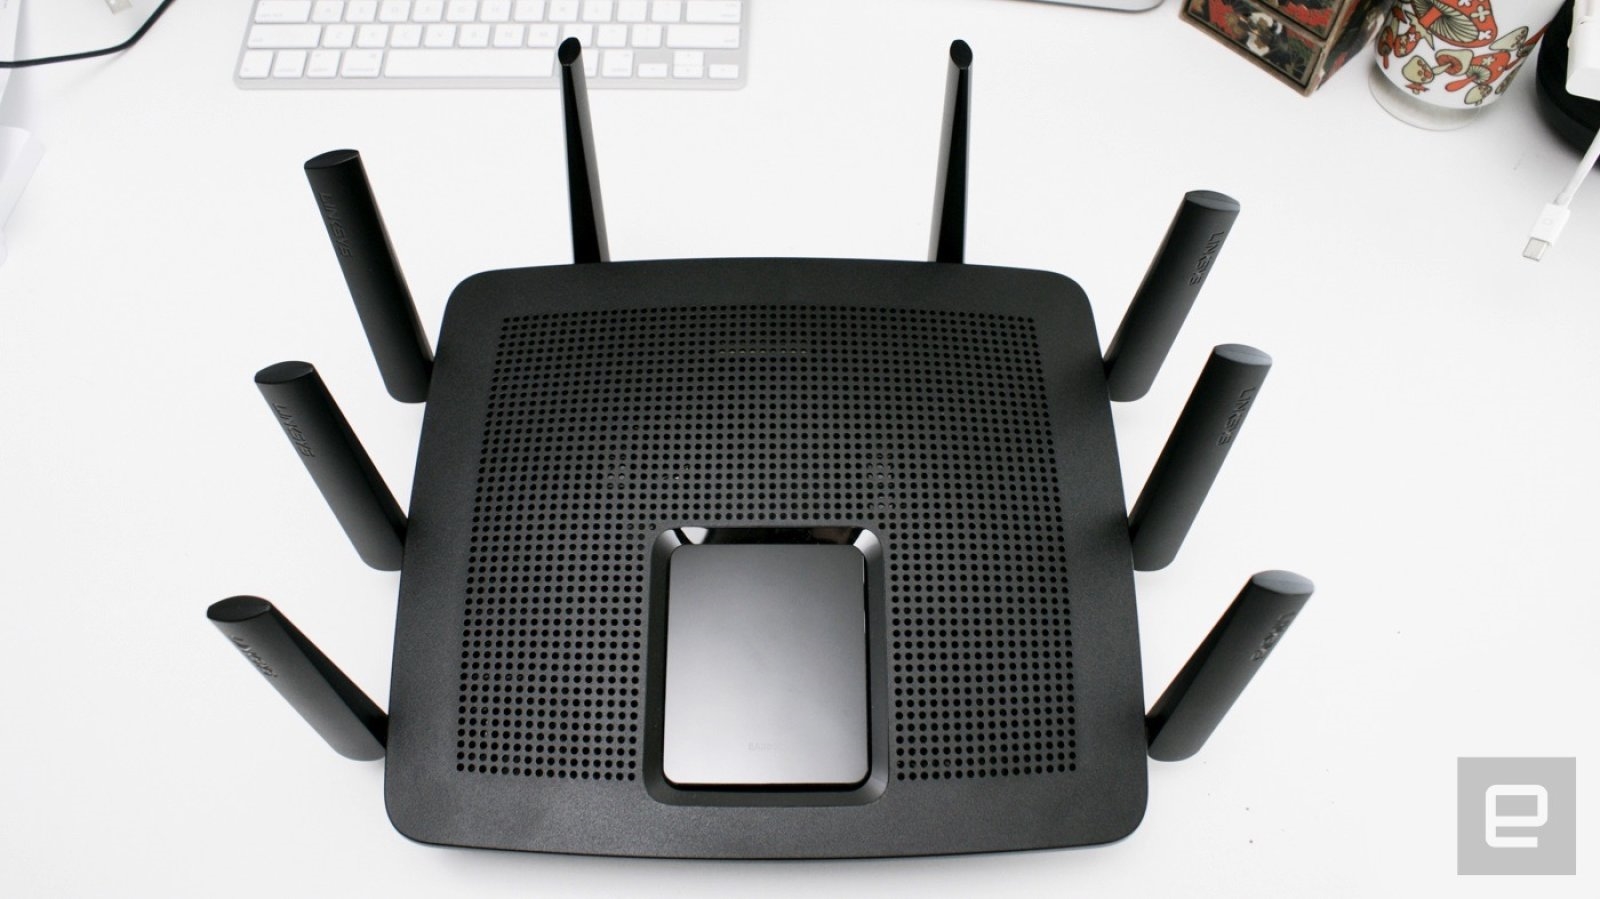 Over 21,000 Linksys routers leaked their device connection histories | DeviceDaily.com